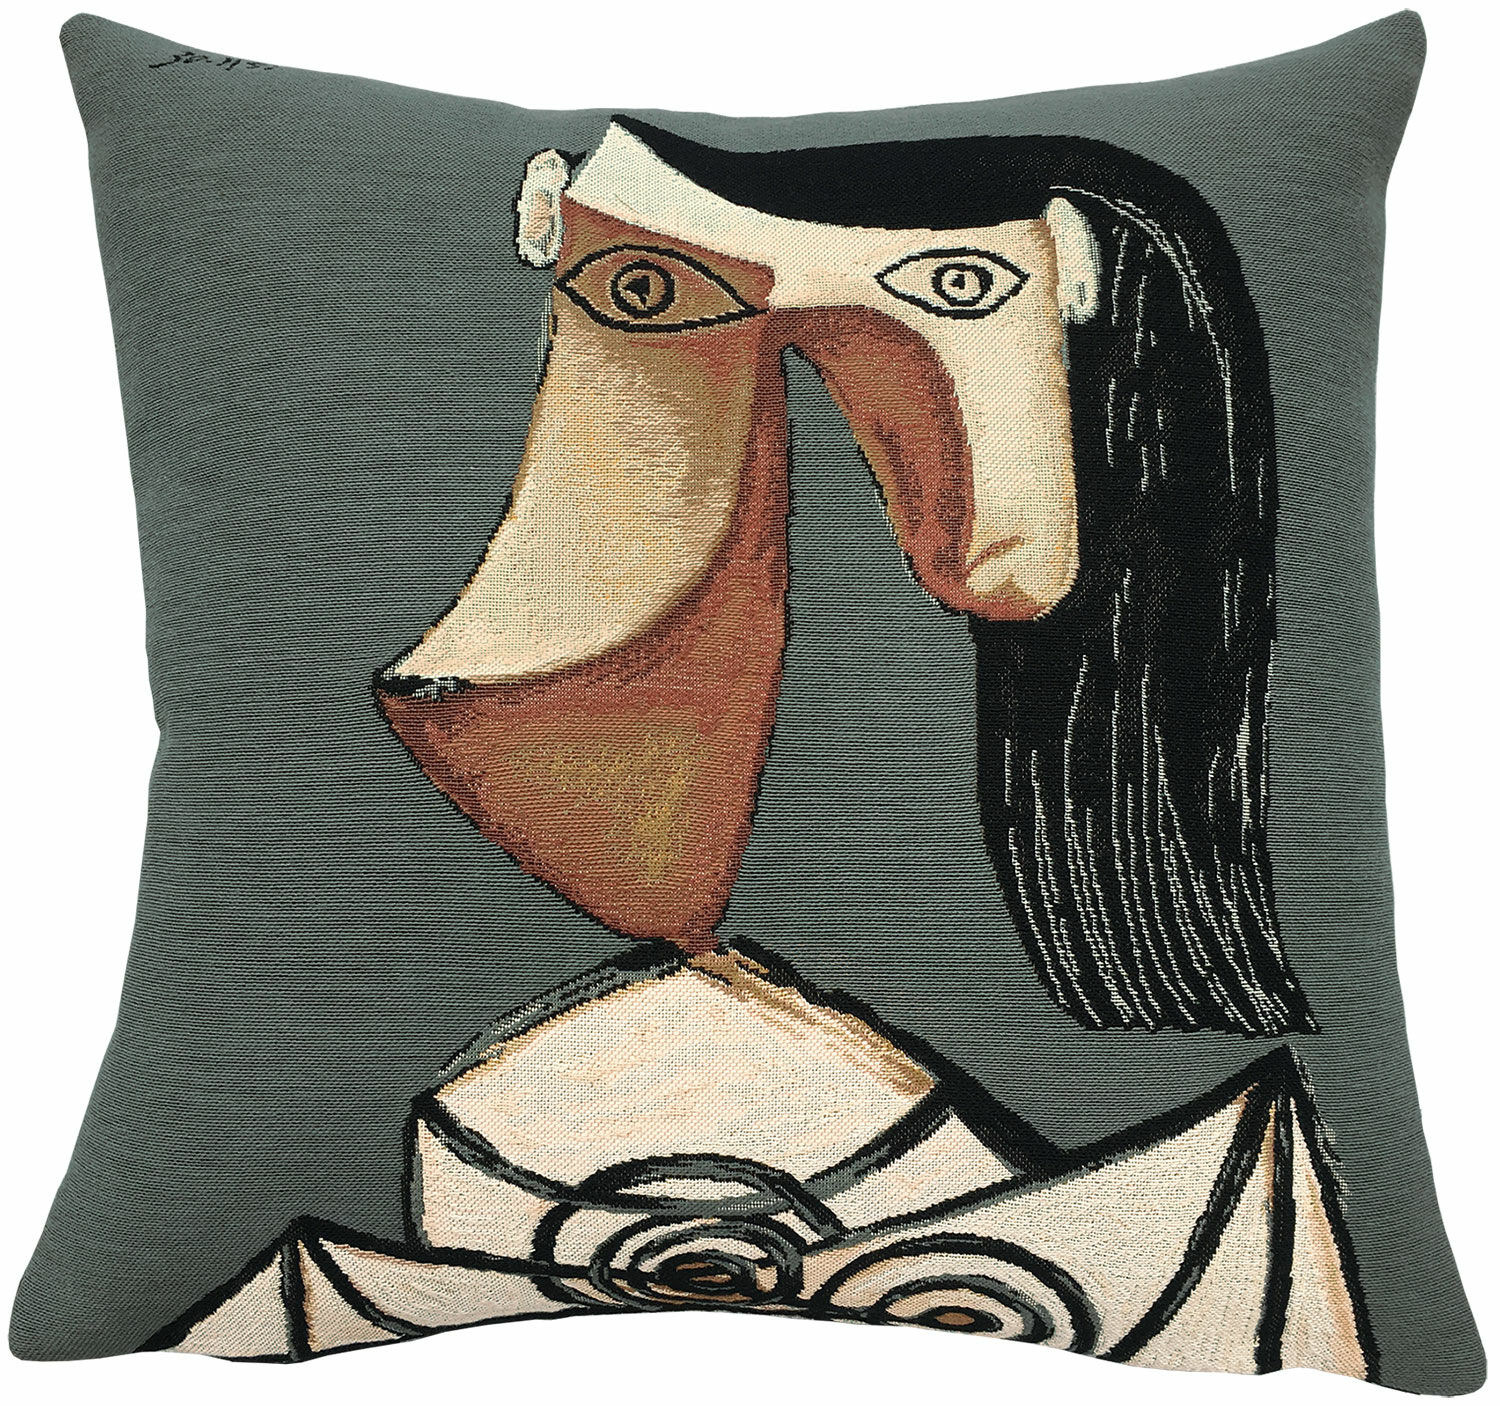 Cushion cover "Head of a Woman" (1939) by Pablo Picasso